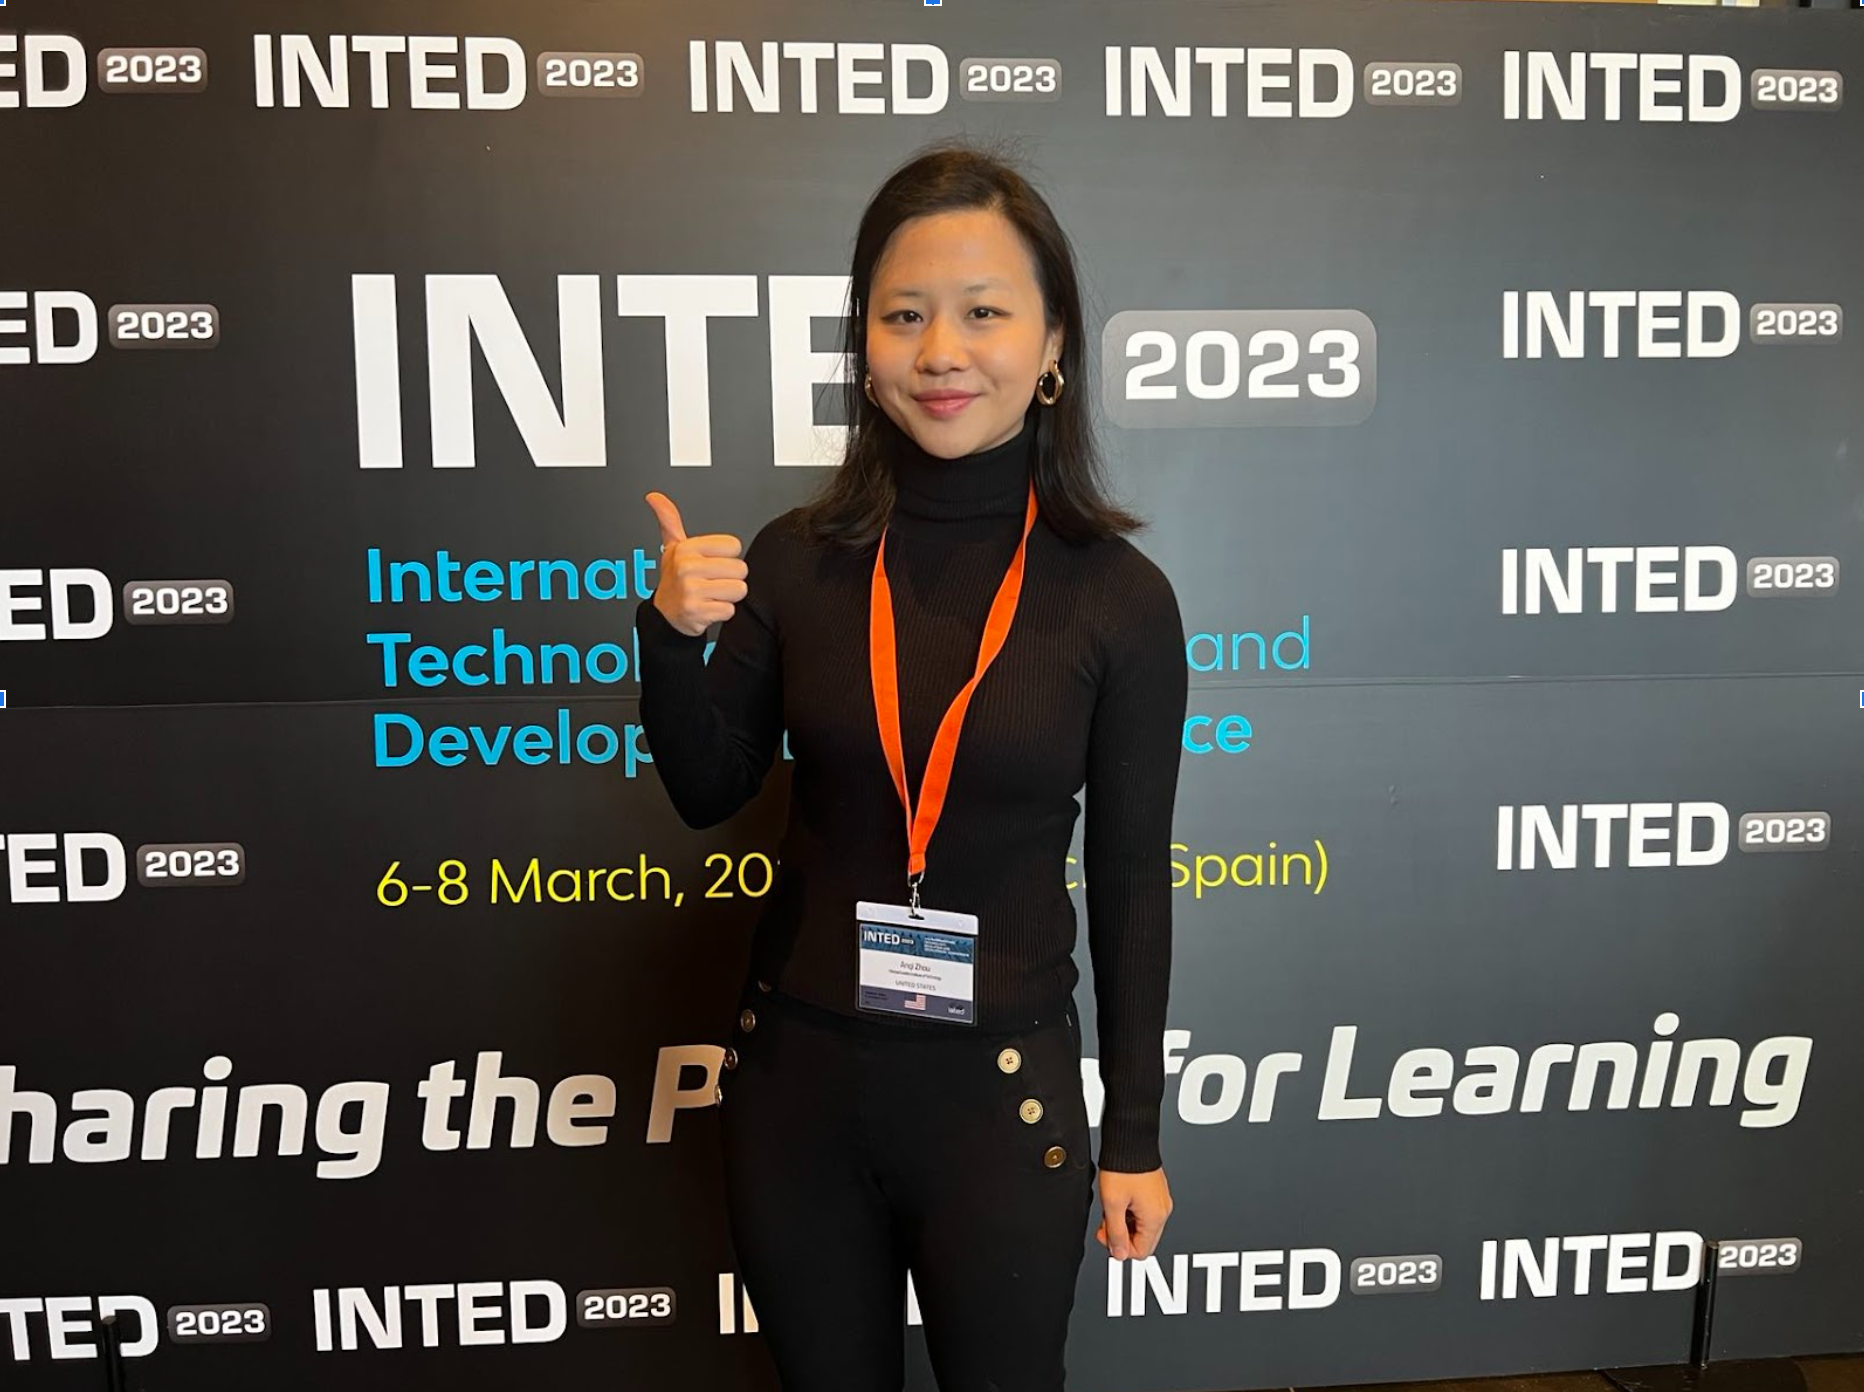 Angie Zhou at INTED Valencia